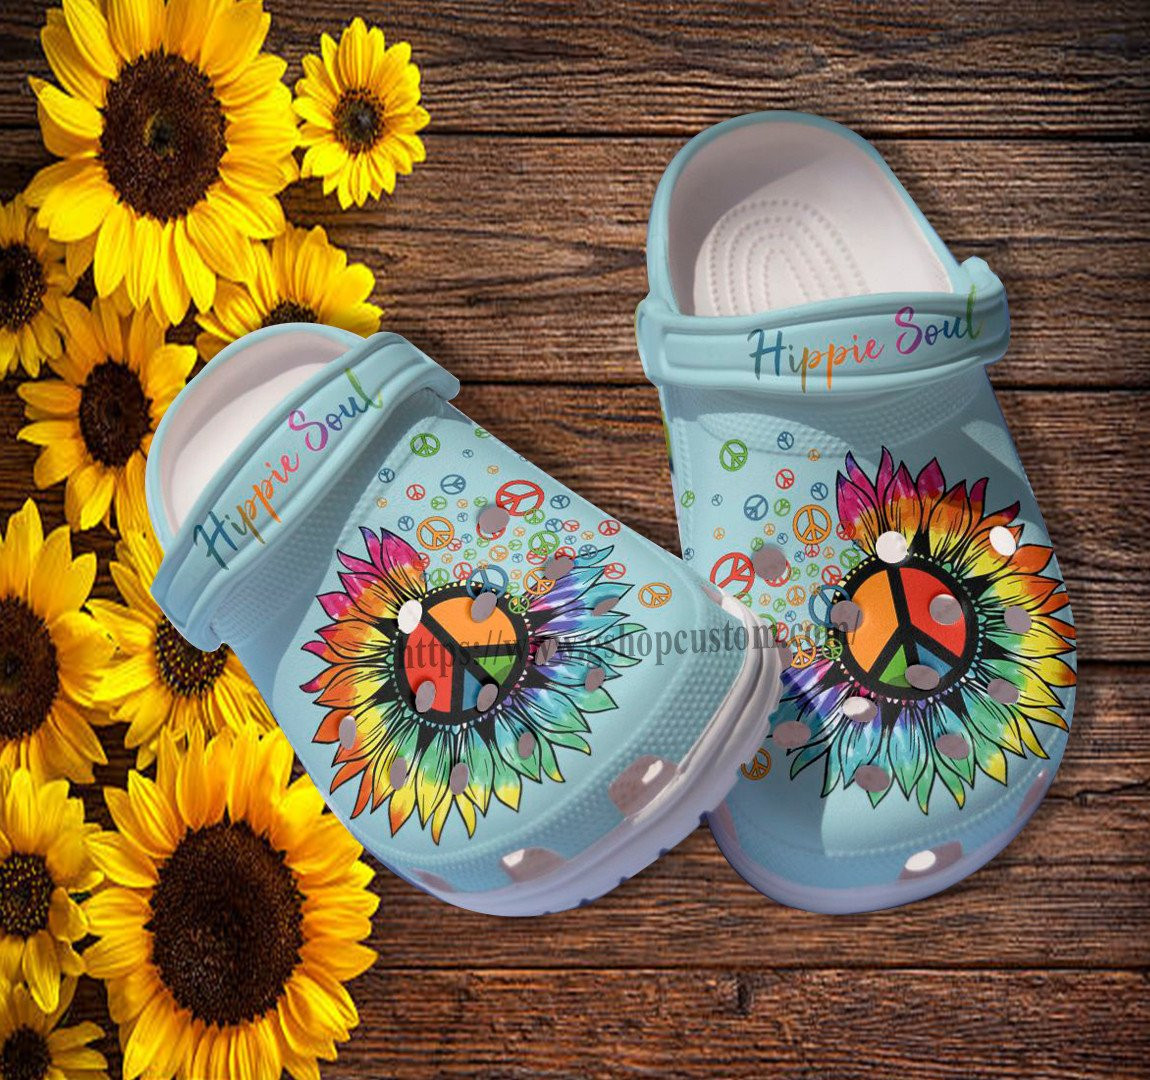 Rainbow Sunflower Peace Hippie Soul Croc Shoes Gift Besties- Hippie Sunflower Vintage Shoes Croc Clogs Mother Day Gift